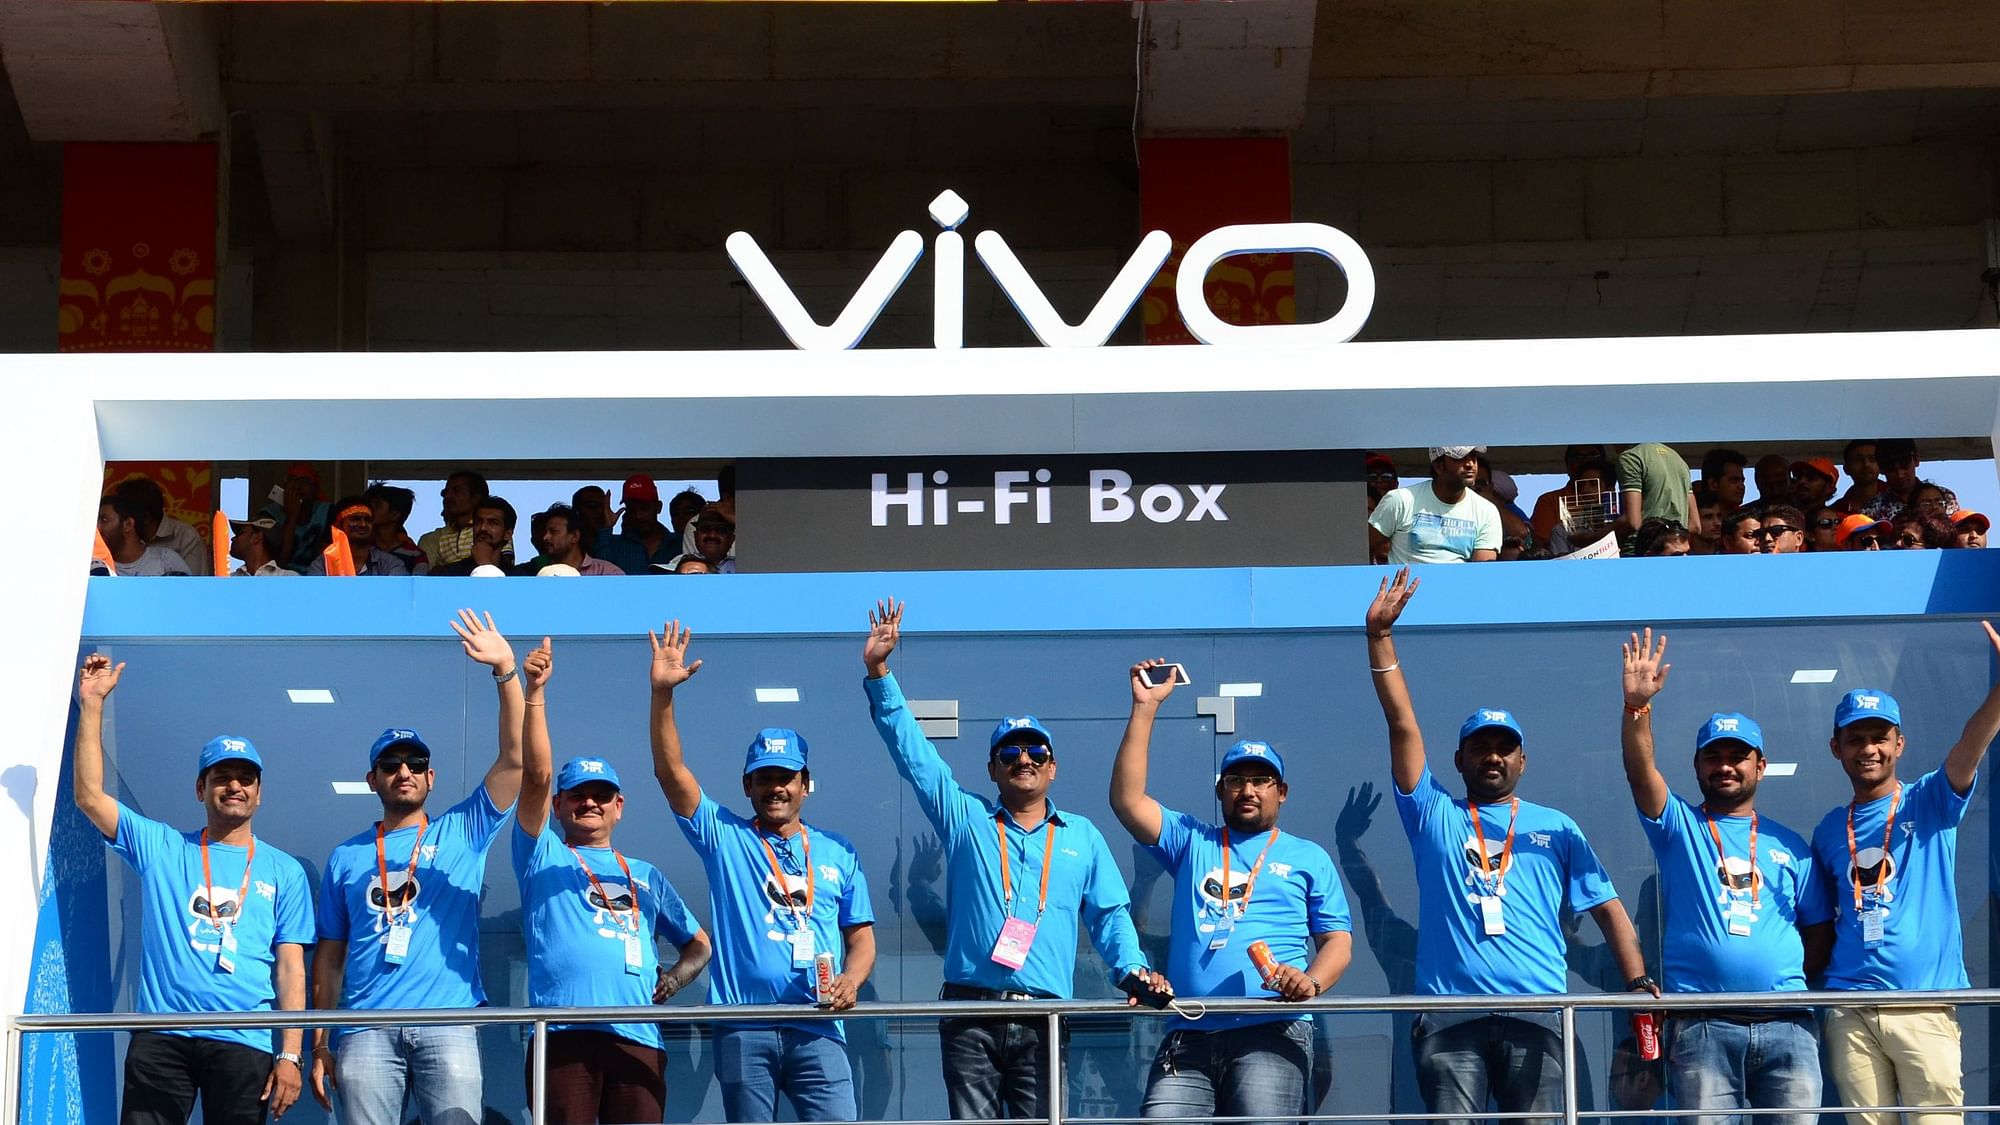 Which brands are in the running to replace Vivo as the title sponsor of IPL in 2020?